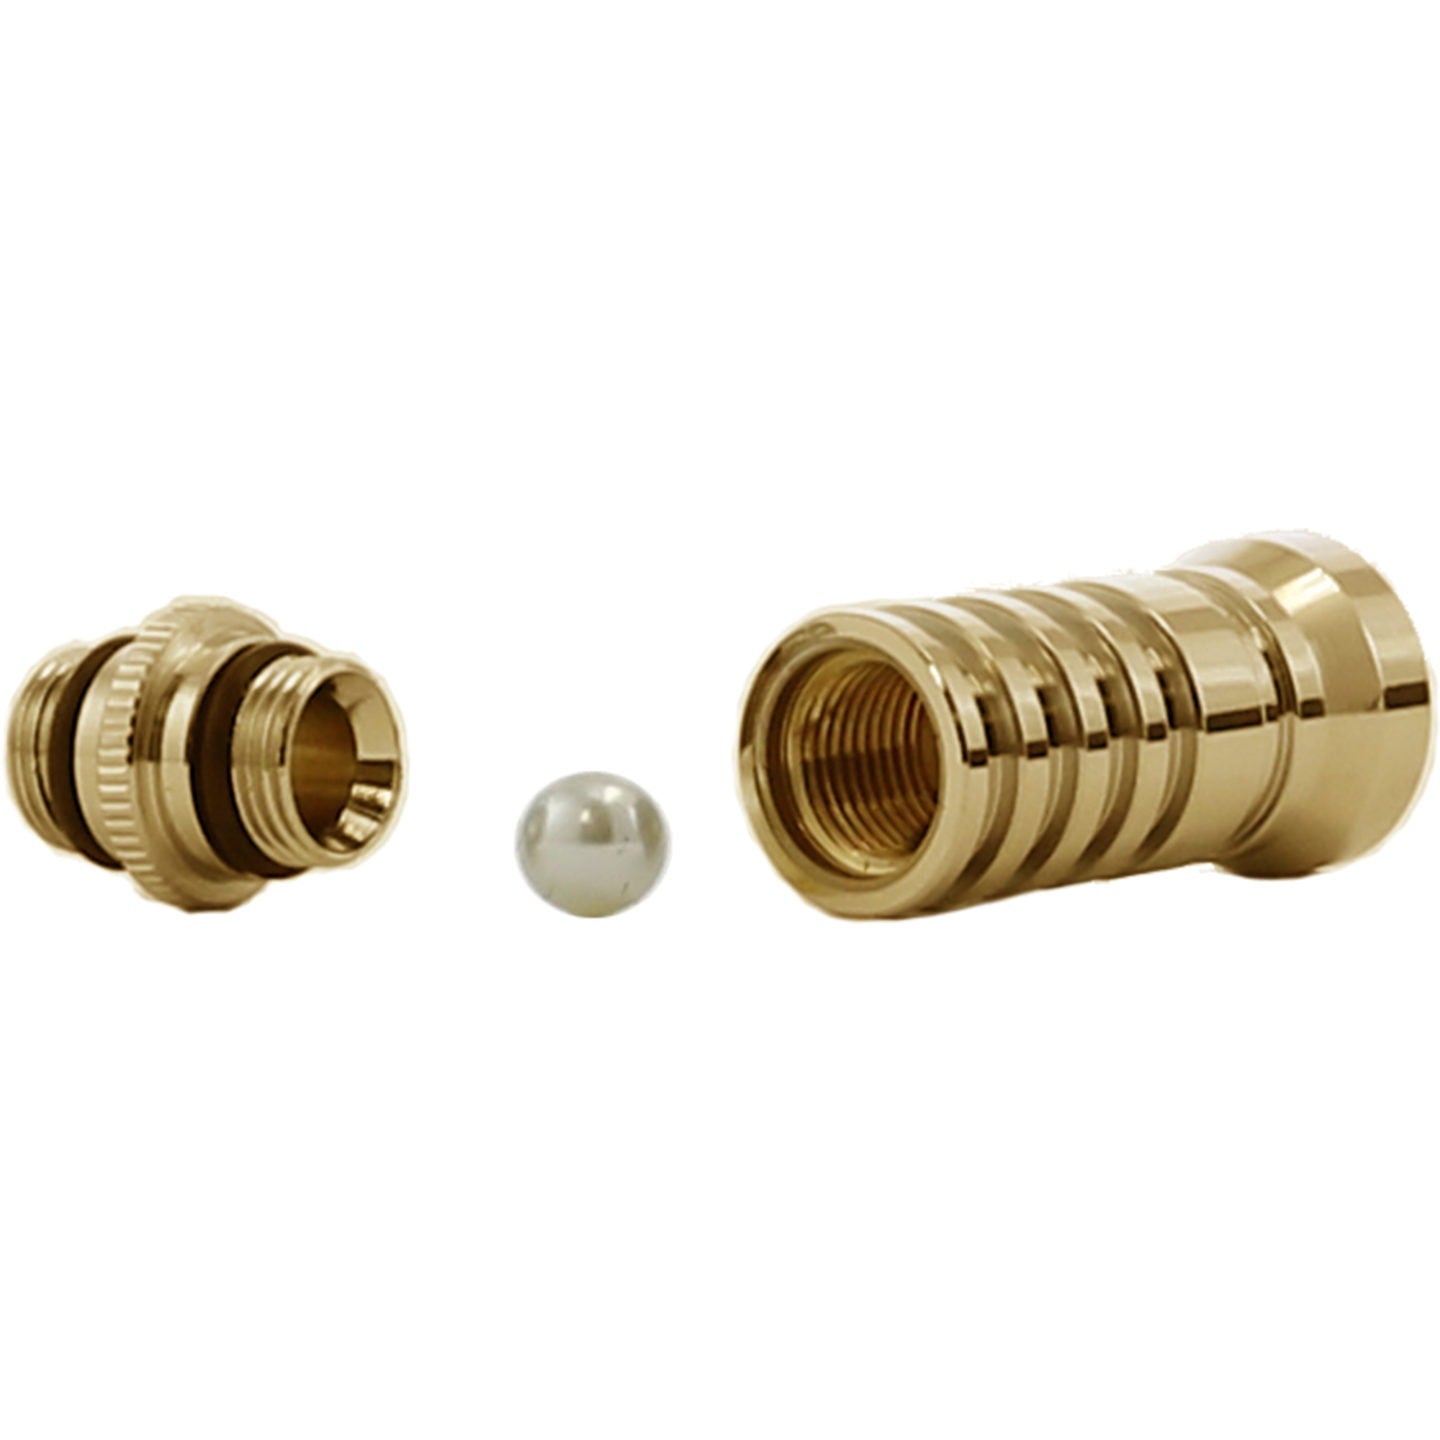 14mm hose adapter 3 pieces includes ball bearing#color_gold